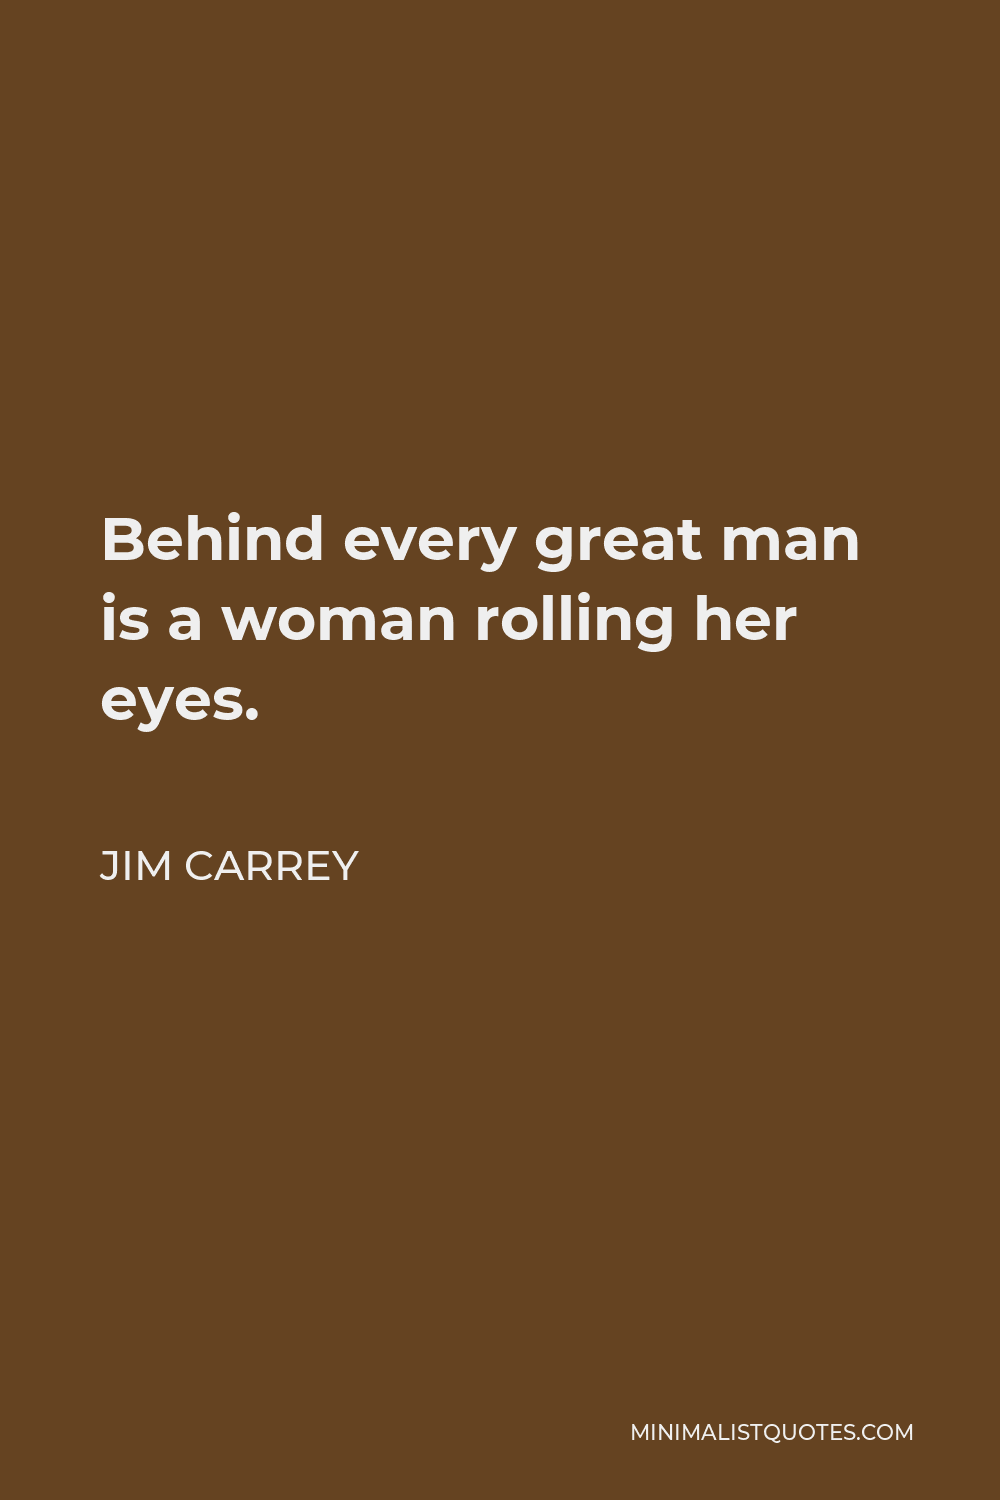 Jim Carrey Quote - Behind every great man is a woman rolling her eyes.